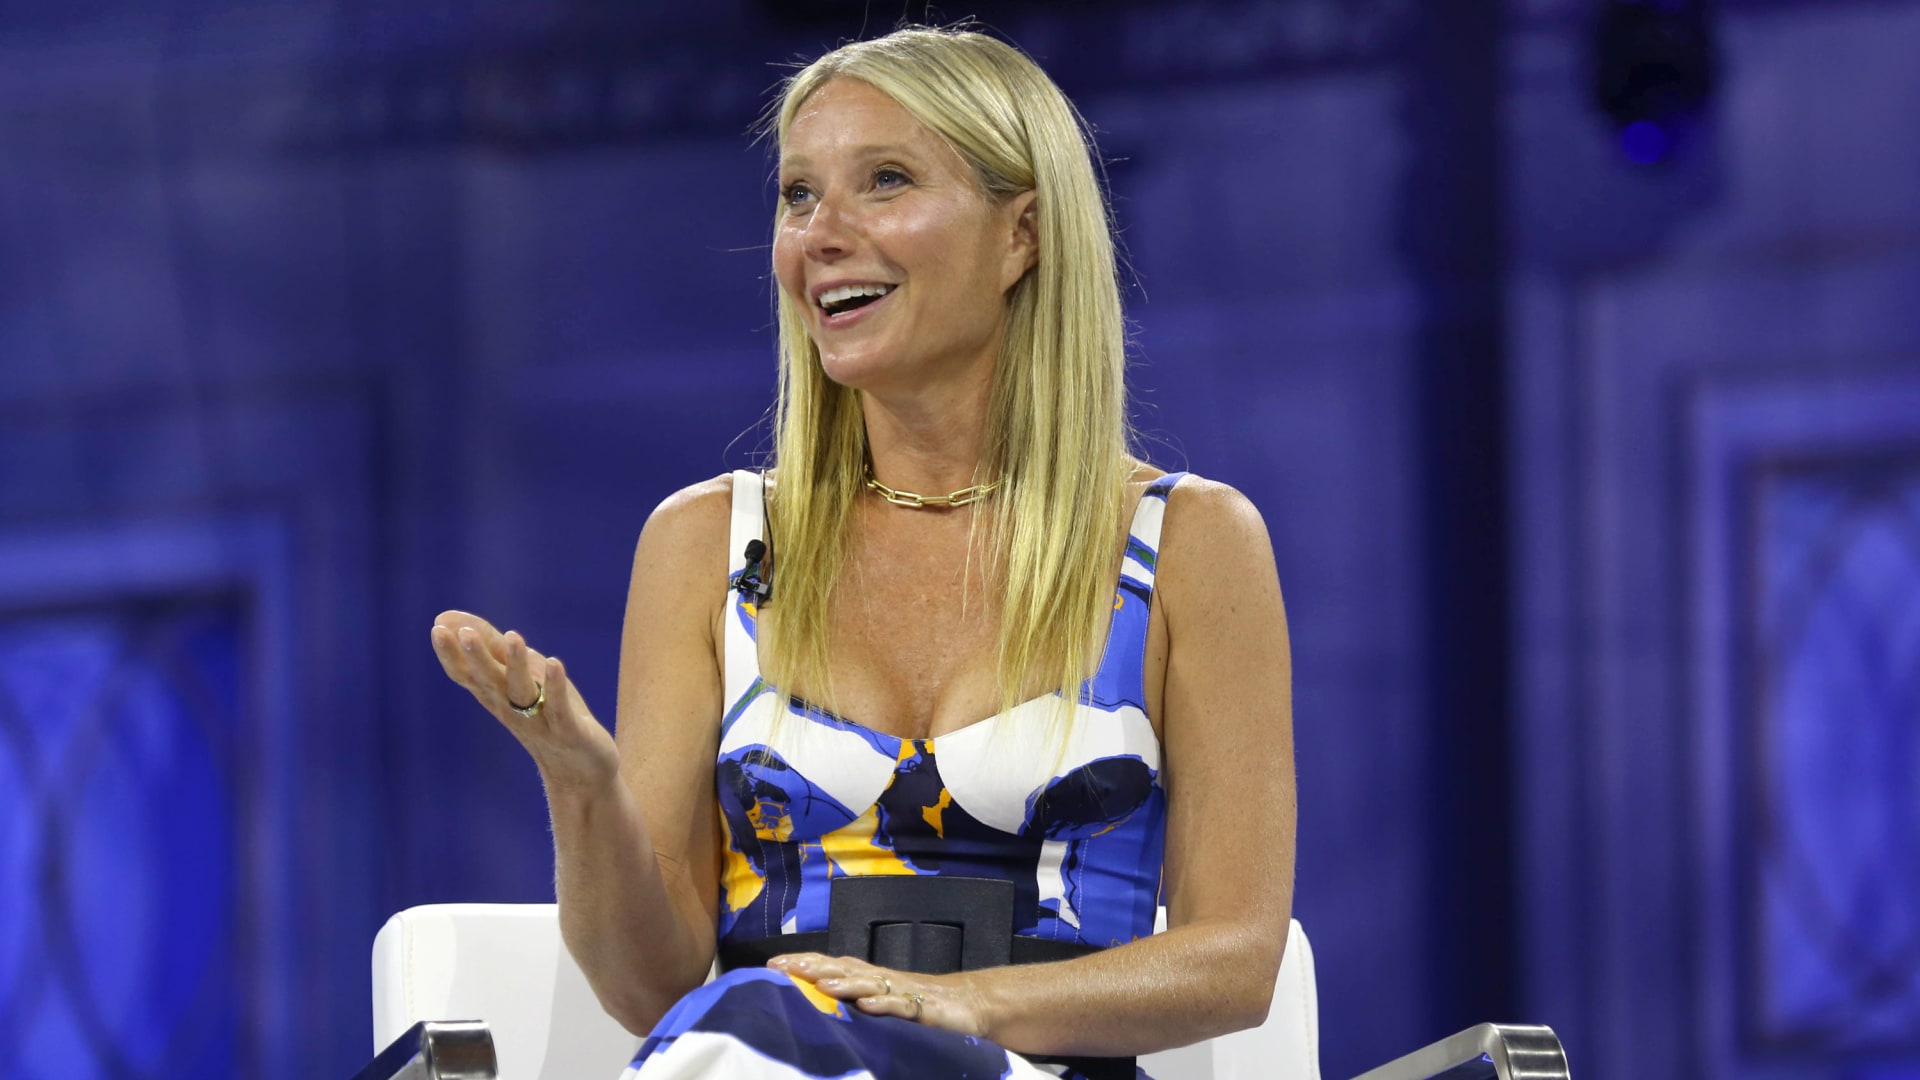 Gwyneth Paltrow speaks on a panel at the 2022 Goldman Sachs 10,000 Small Businesses Summit.